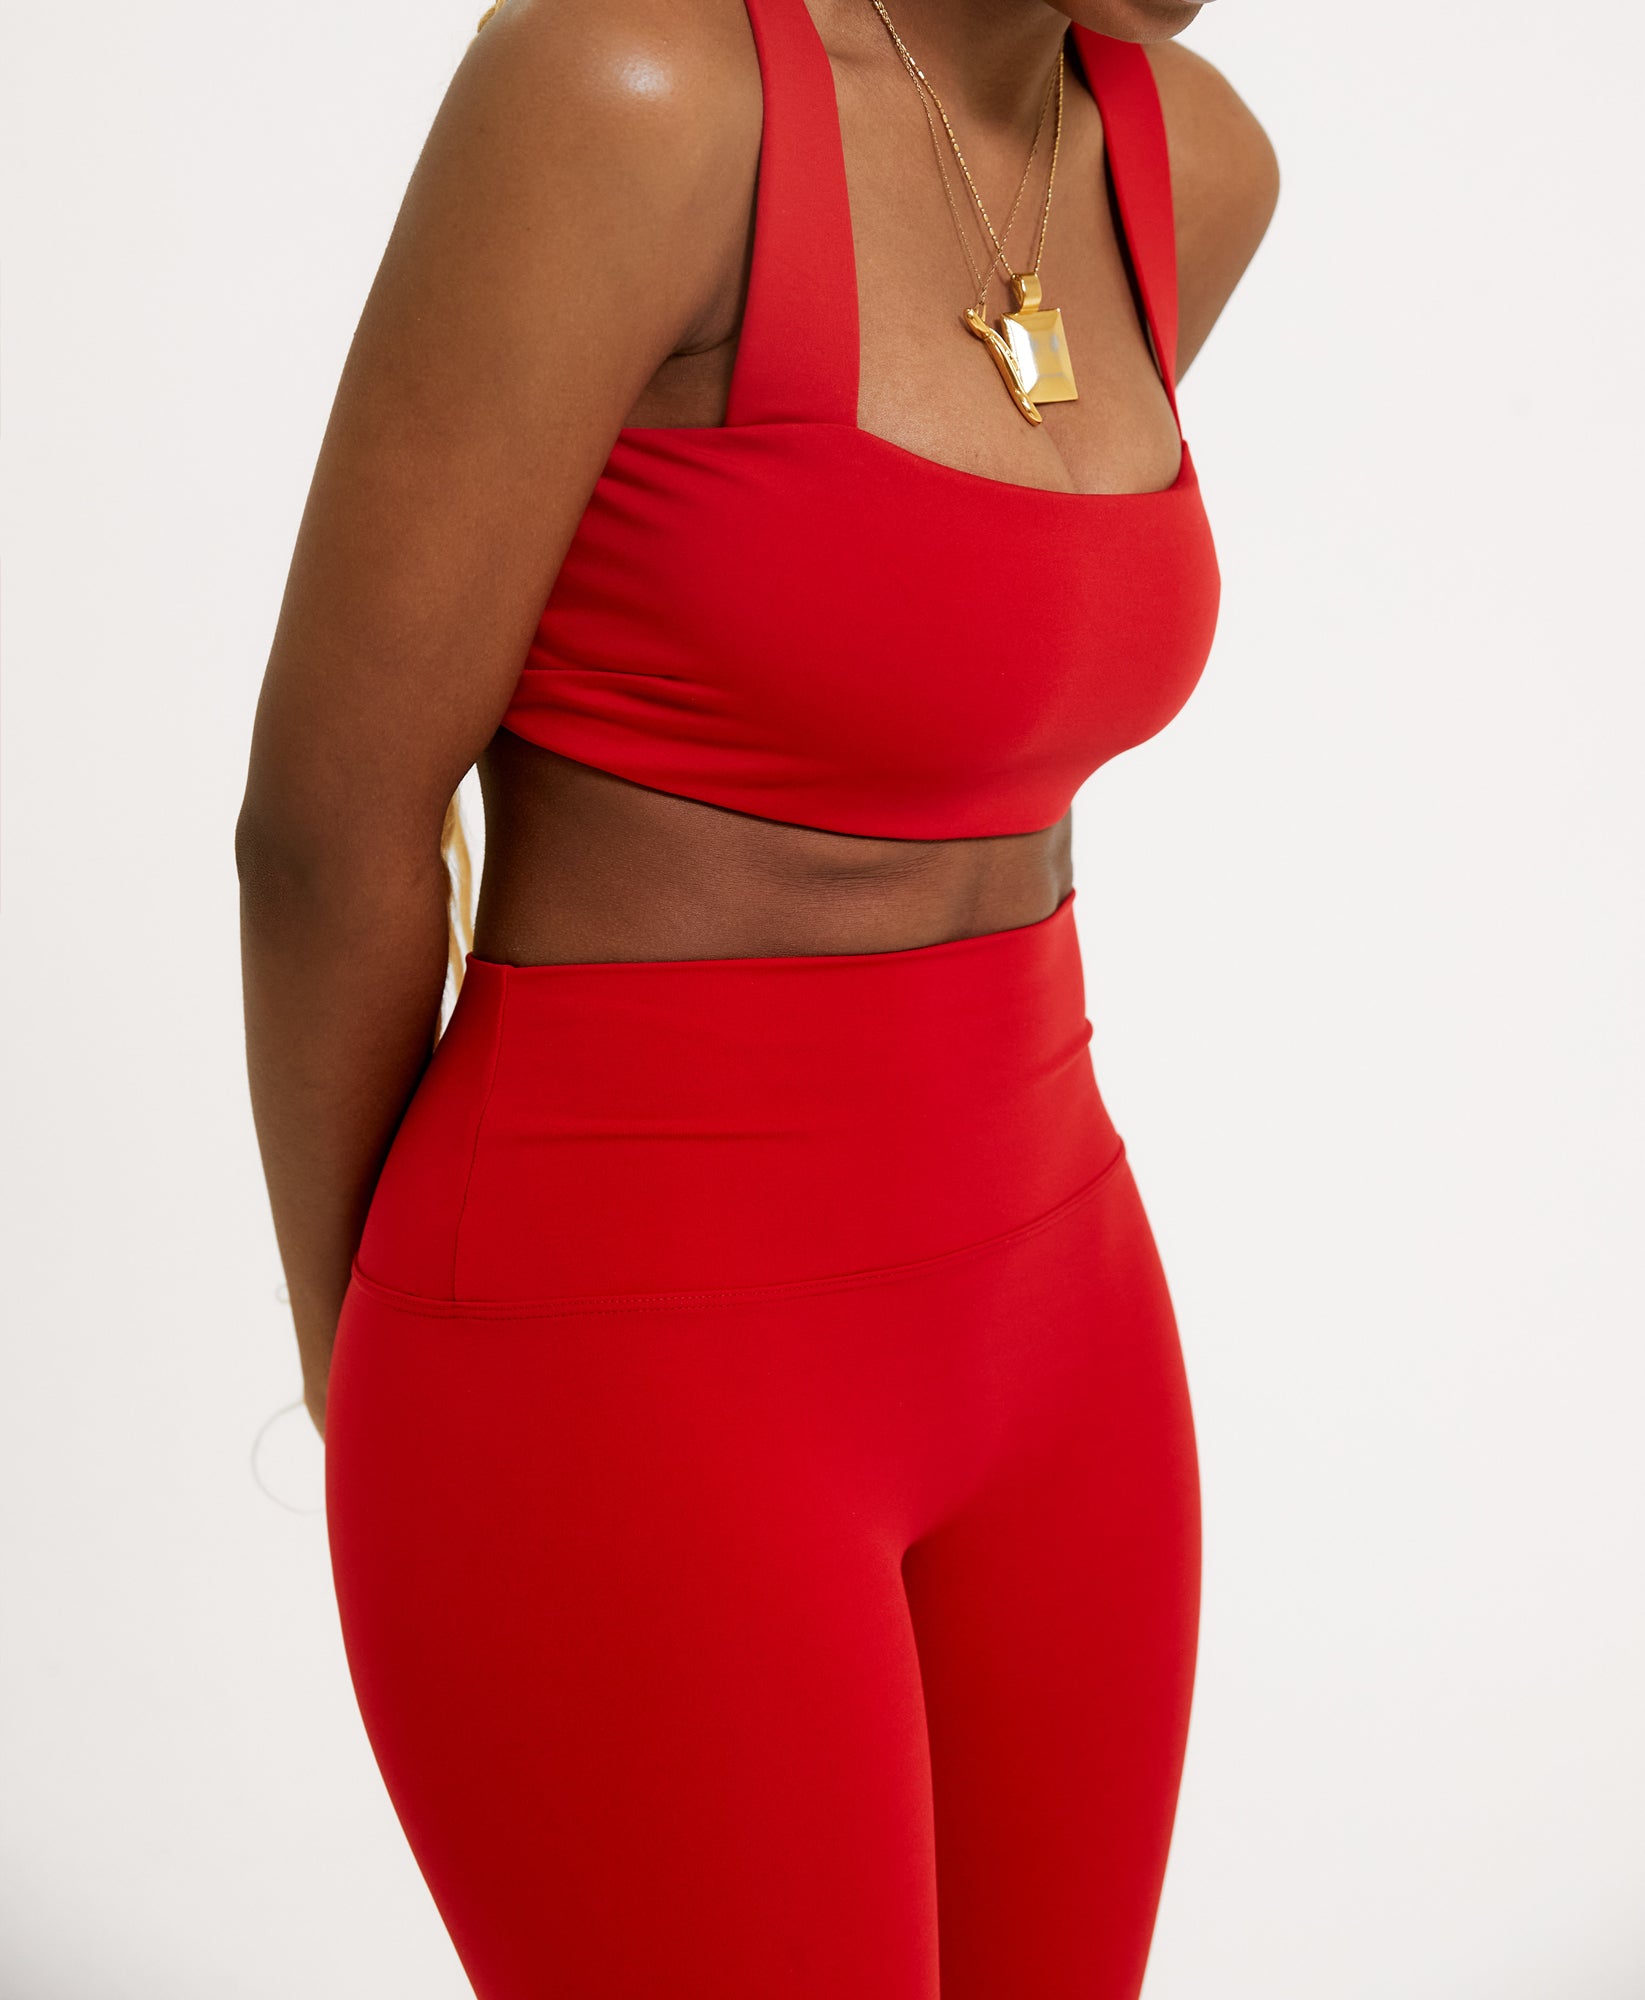 Wear One's At Routine Legging in Casanova Red on Model Front Side Detailed View